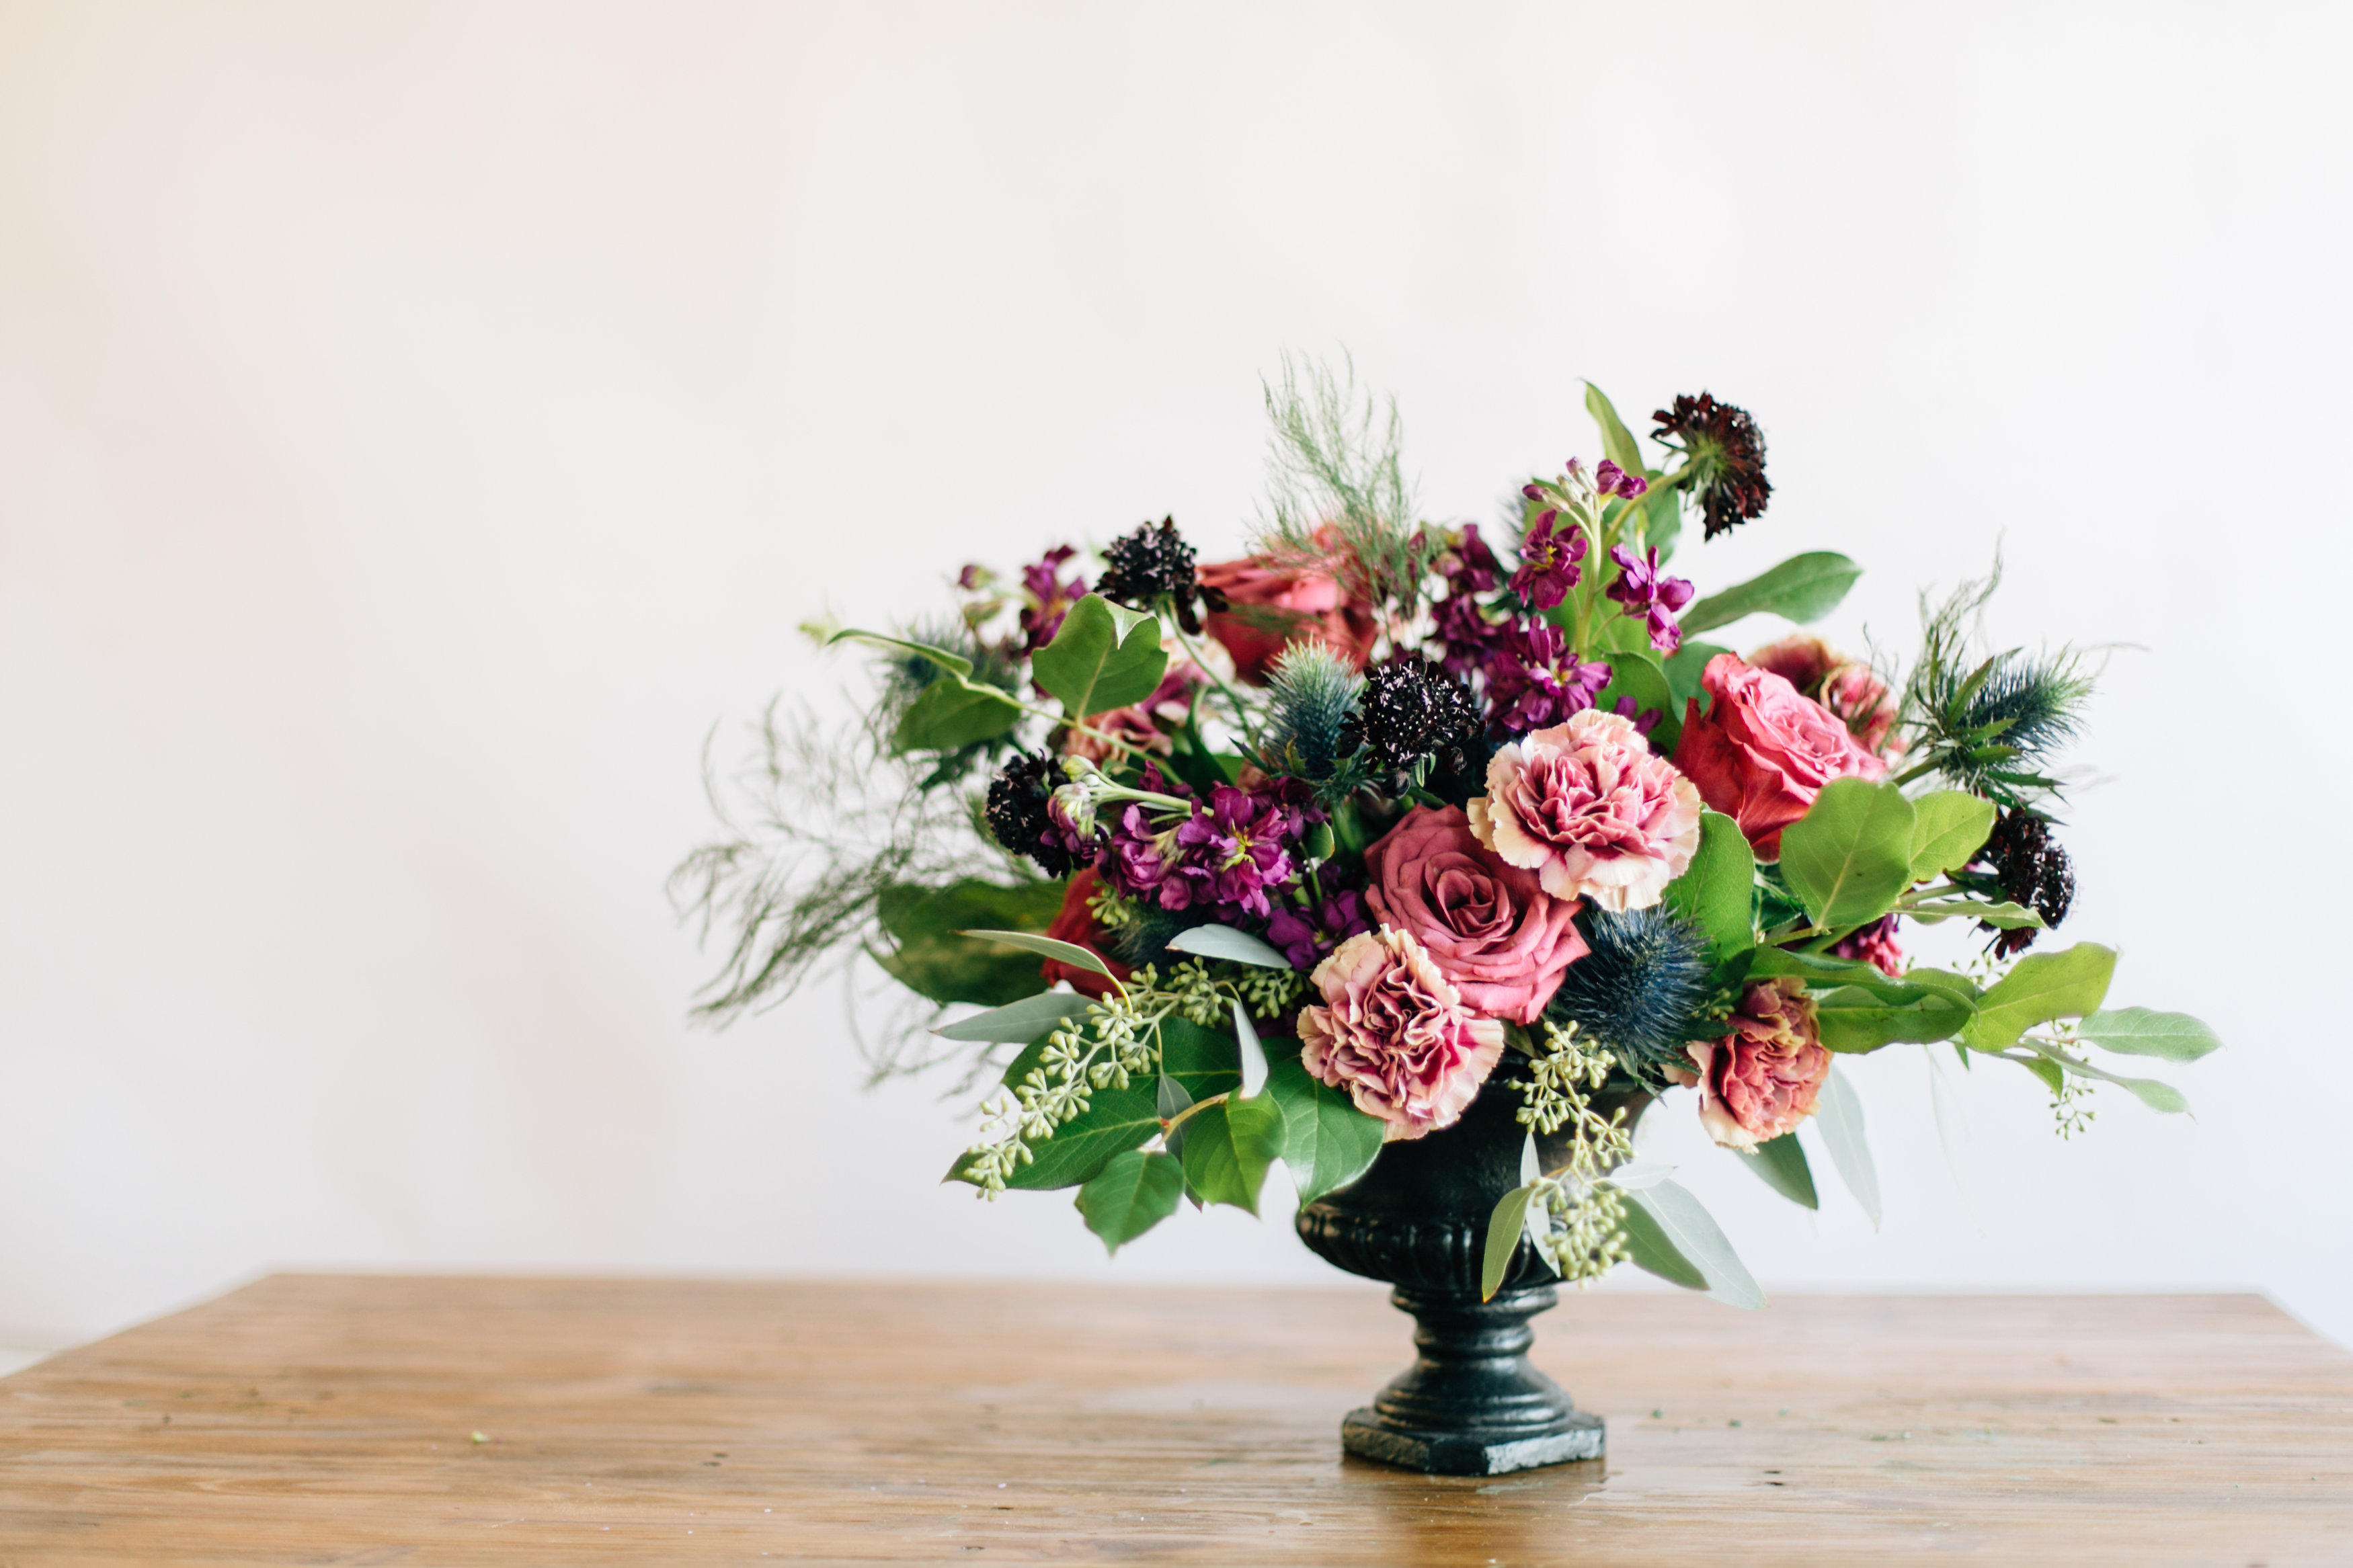 How To DIY a Floral Urn Centerpiece